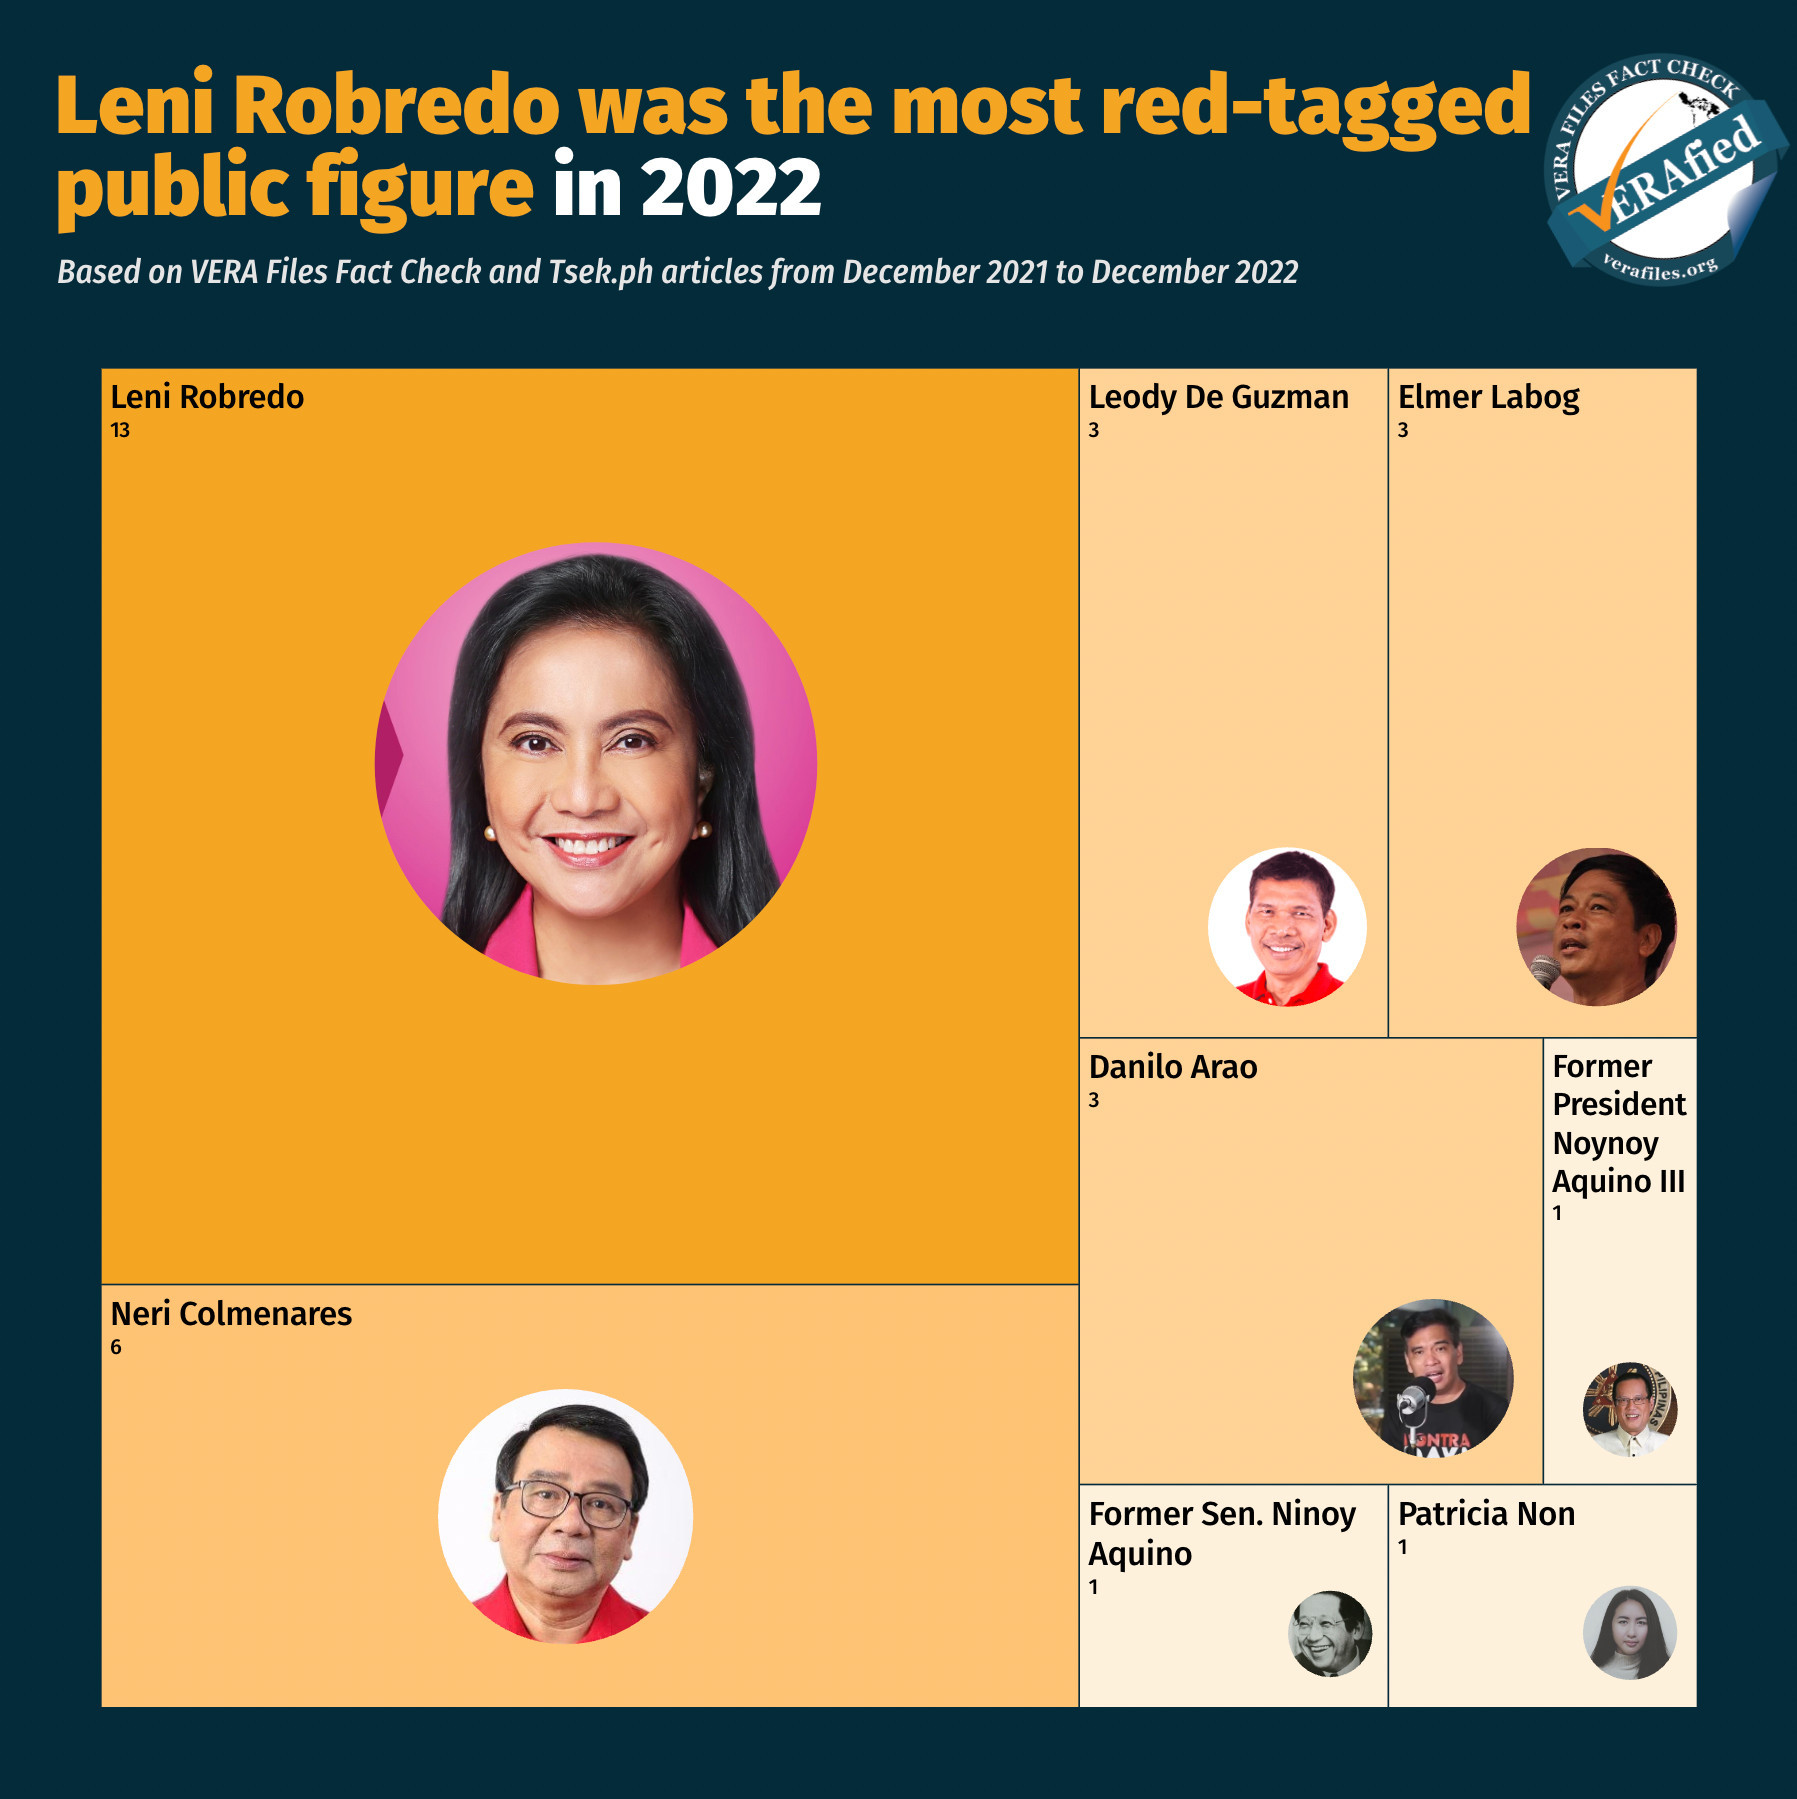 Leni Robredo was the most red-tagged public figure in 2022